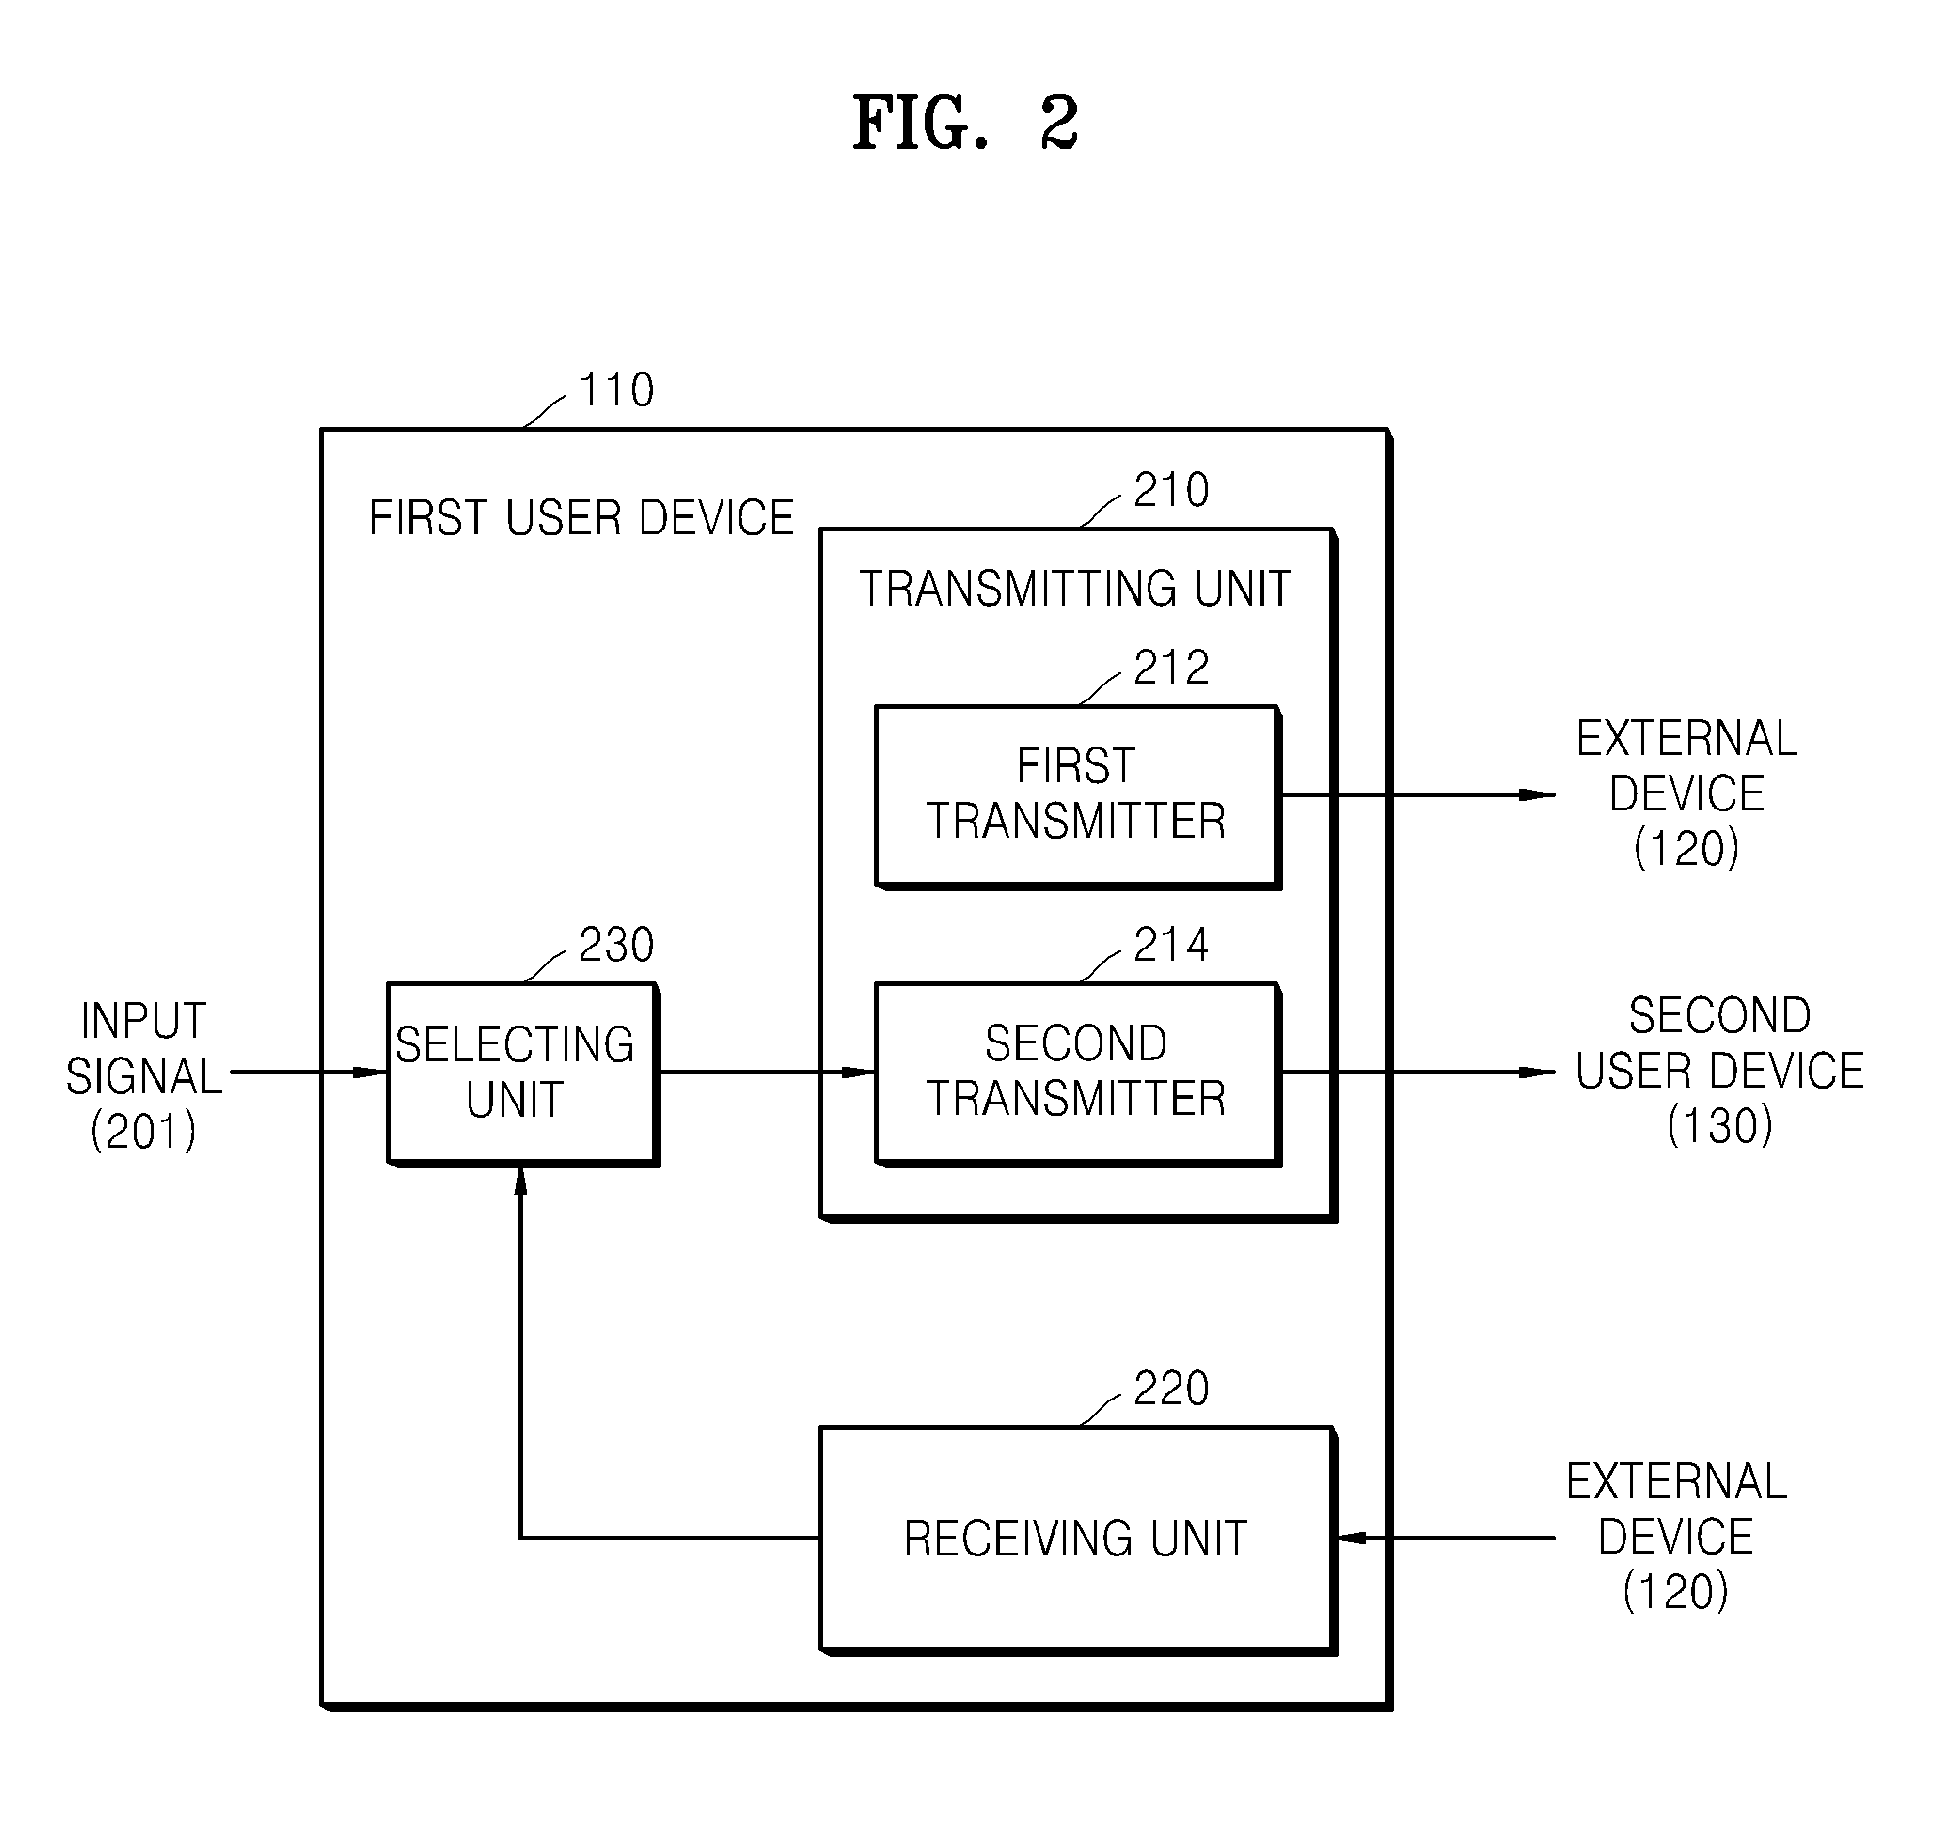 Method and apparatus for sharing content